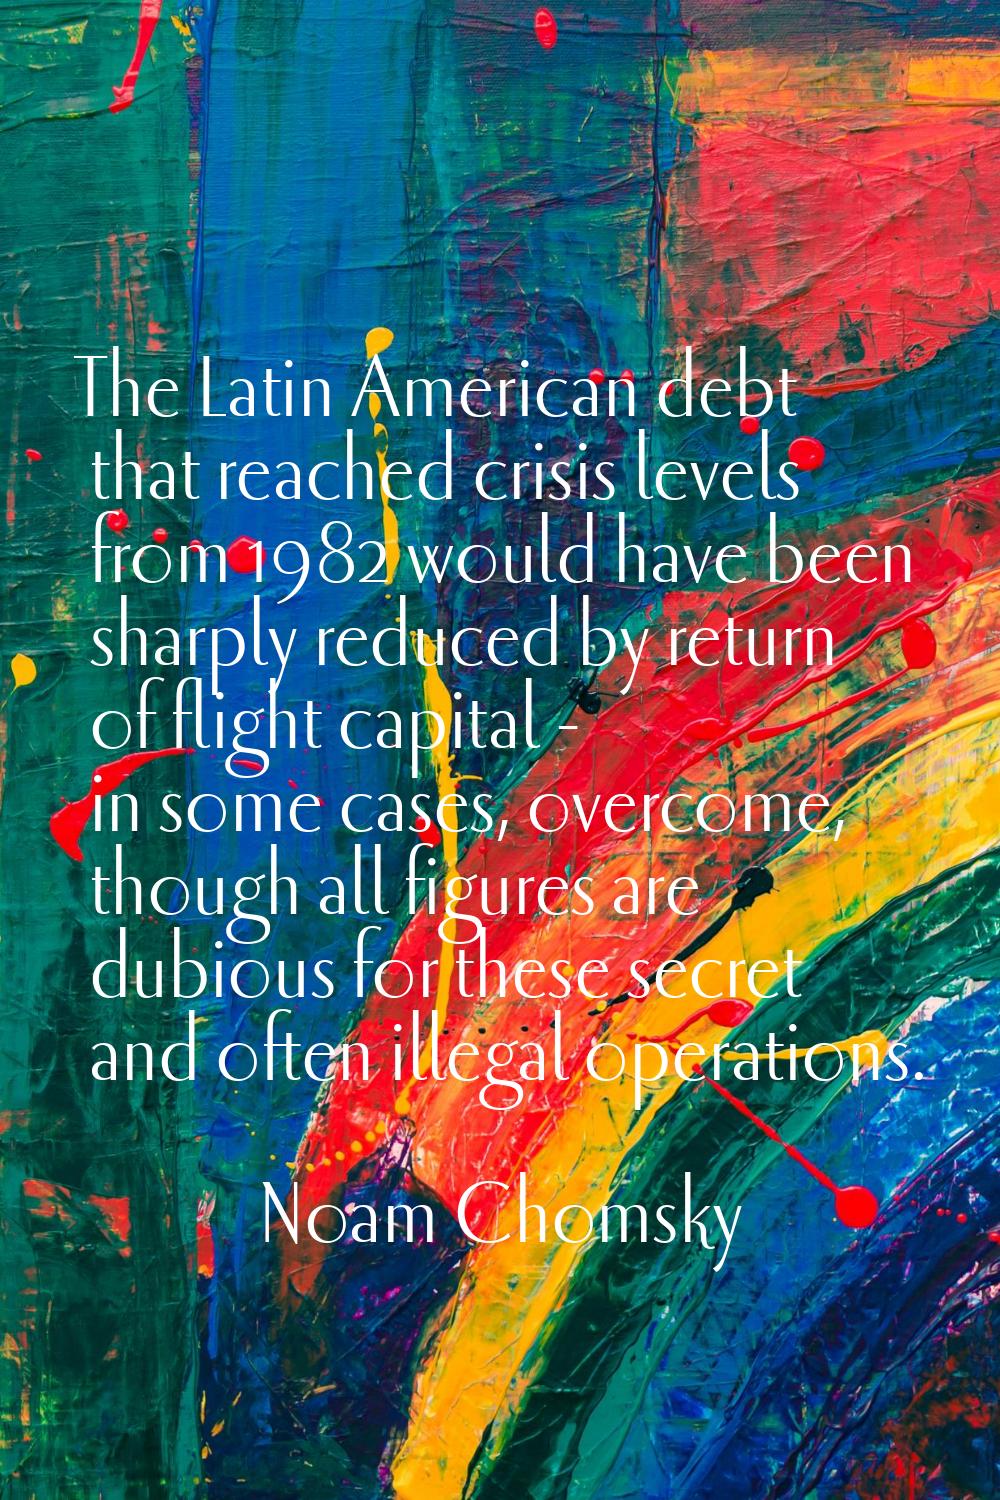 The Latin American debt that reached crisis levels from 1982 would have been sharply reduced by ret